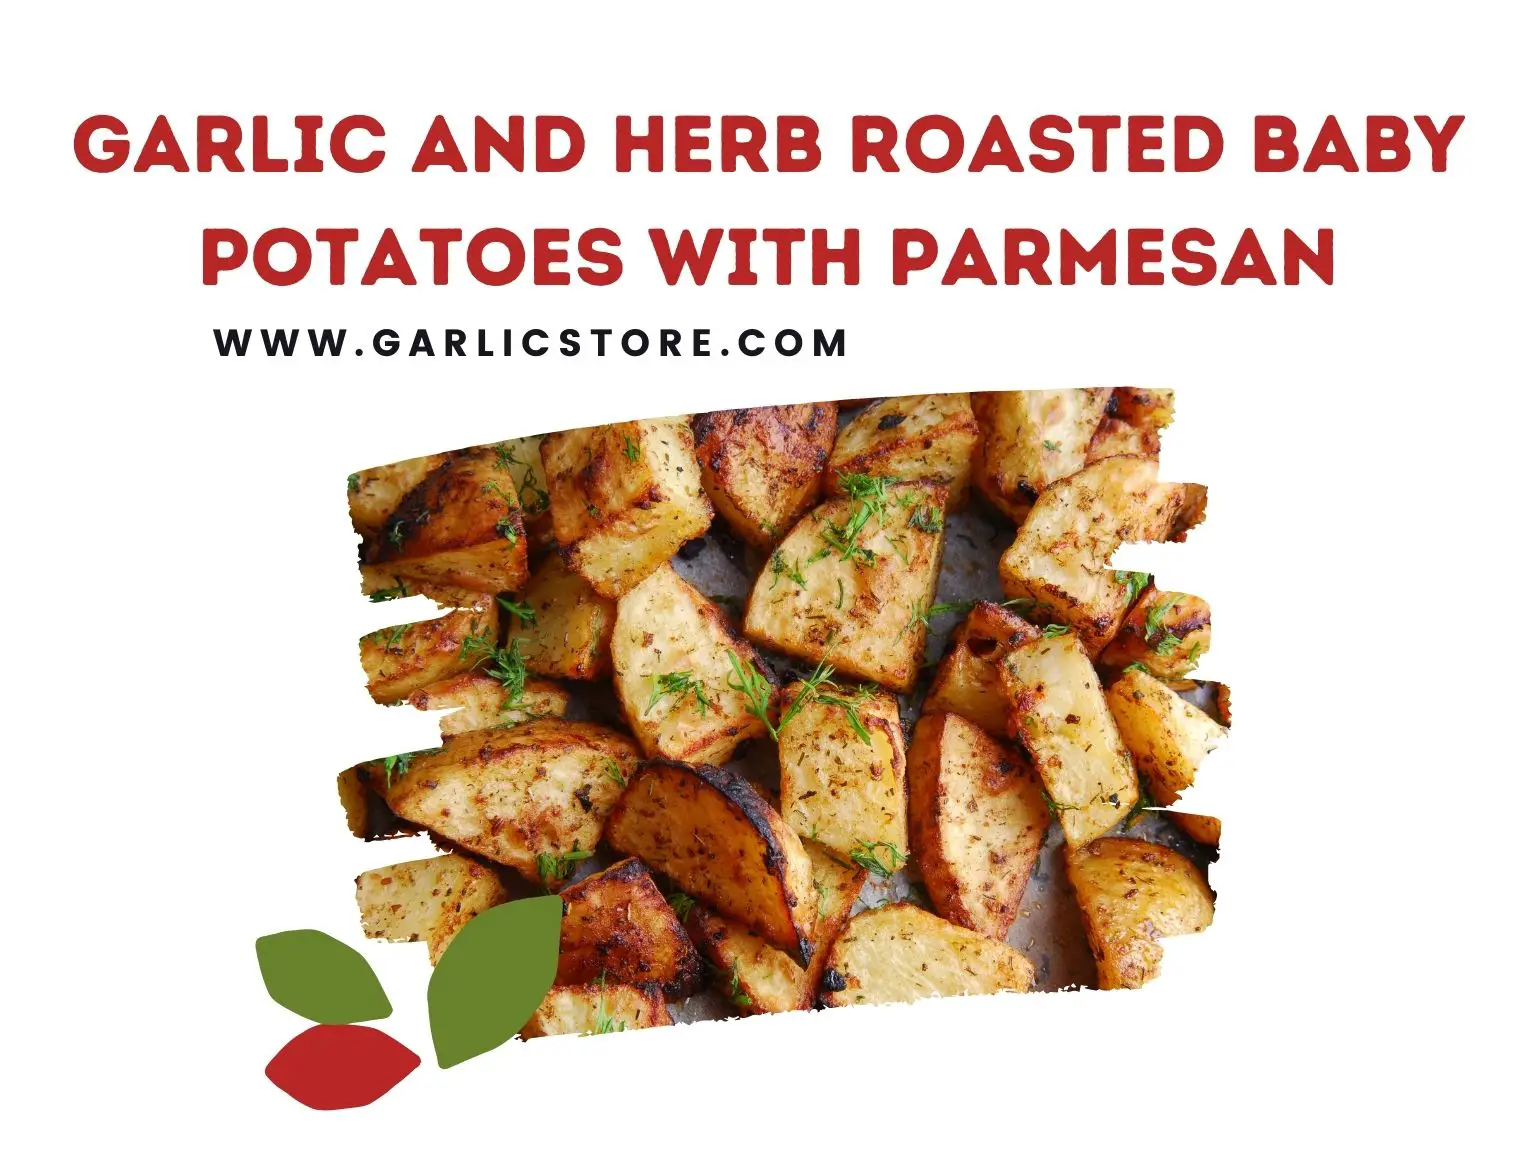 Garlic and Herb Roasted Baby Potatoes with Parmesan